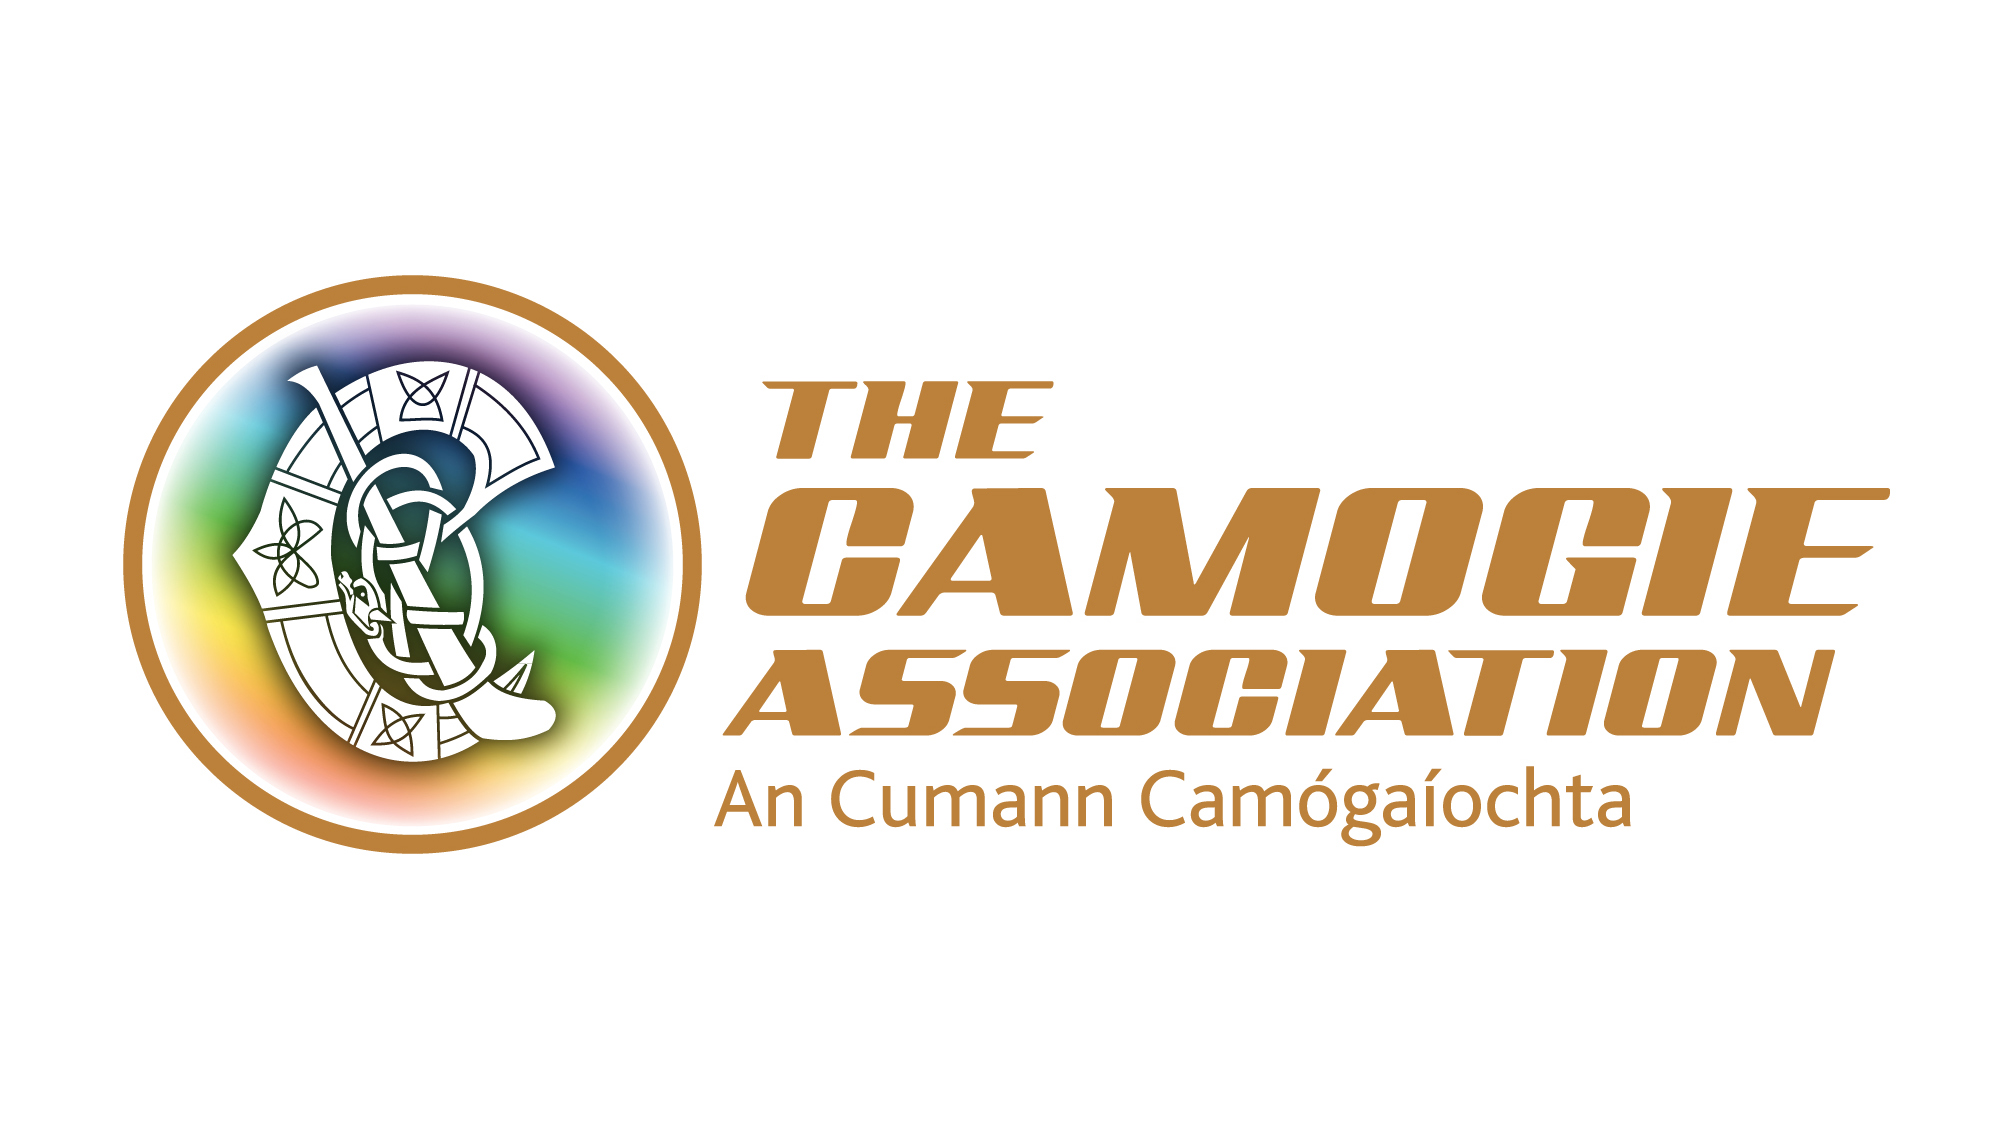 Update in relation to COVID-19 (Coronavirus) from the Camogie Association